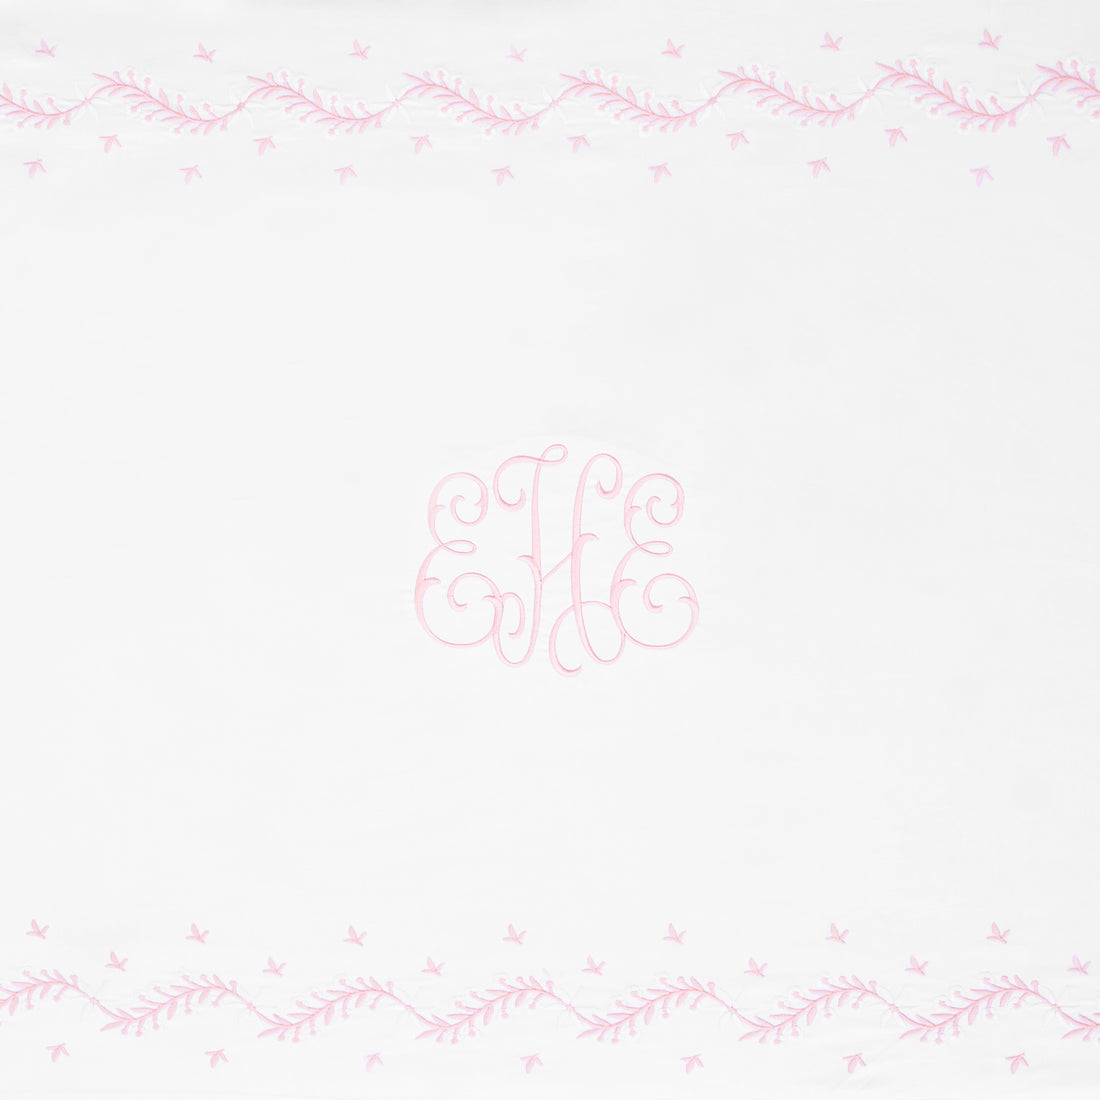 Little English classic nursery goods for baby, white crib sheet with simple light pink embroidery along the edges for baby